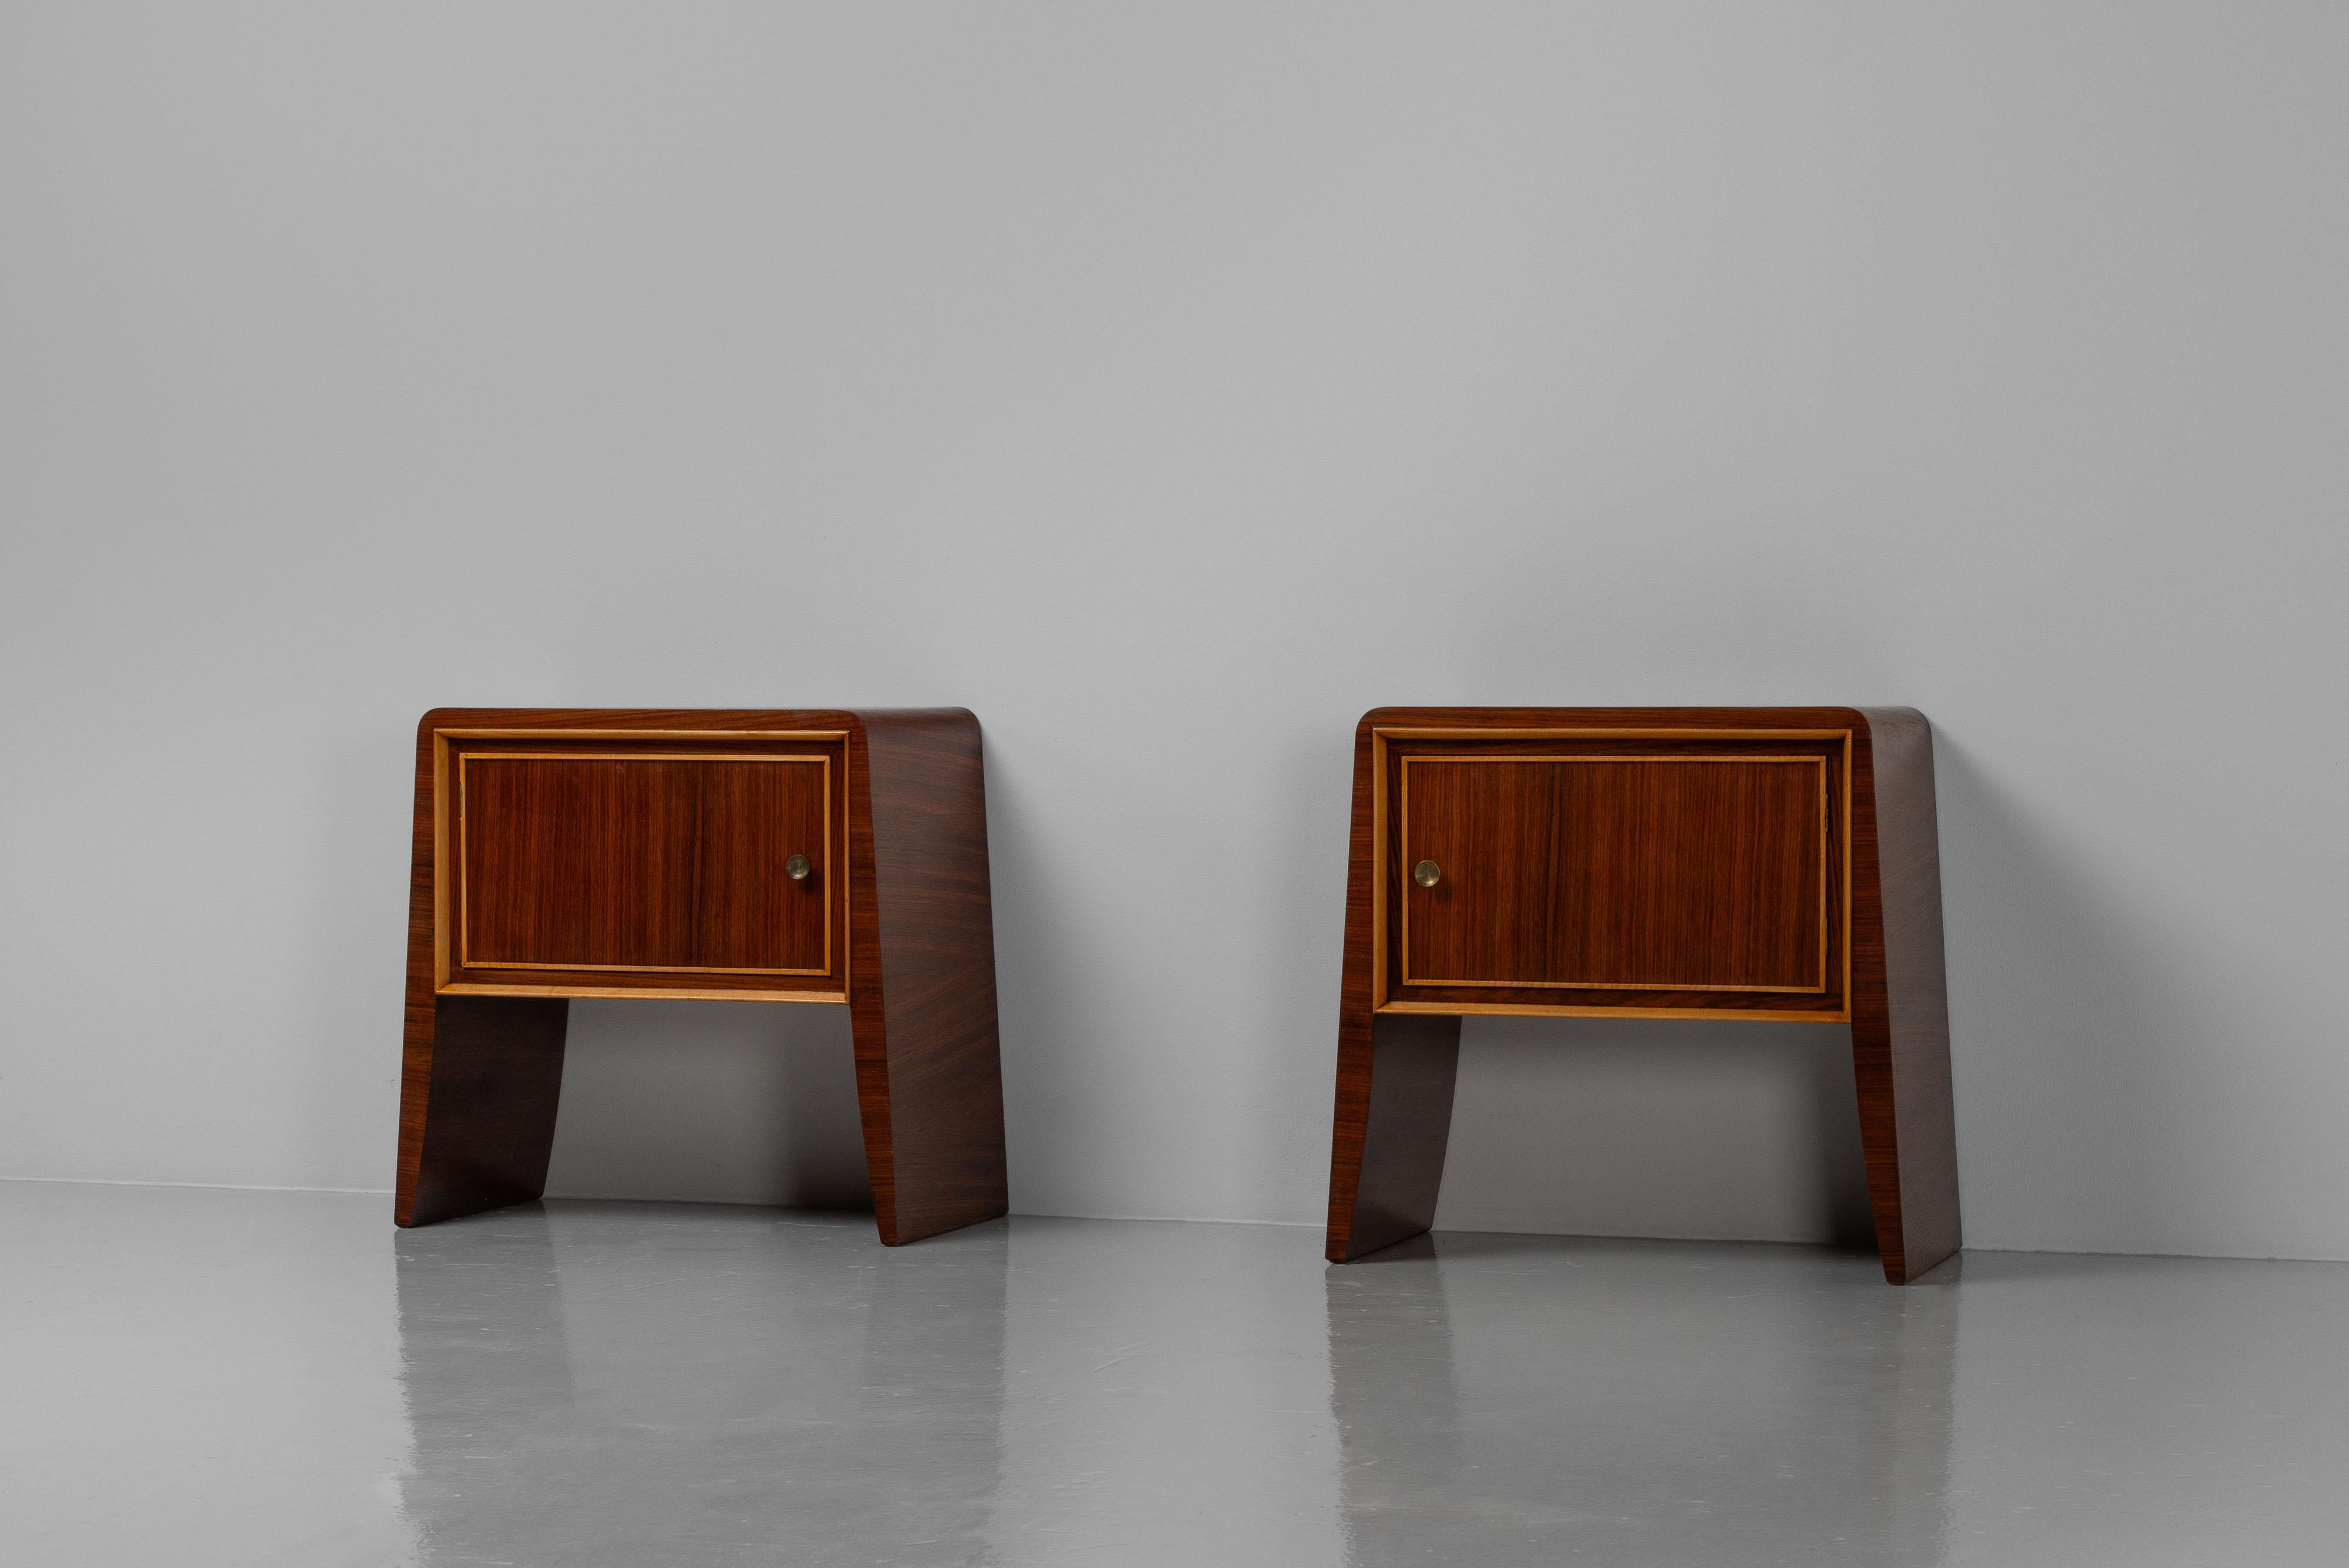 Striking pair of night cabinets designed by Paolo Buffa made by an unknown manufacturer in Italy in 1950s. Made from beautiful rosewood, featuring contrasting beech wooden slats on the door panels. The dark wood and light slats create a striking